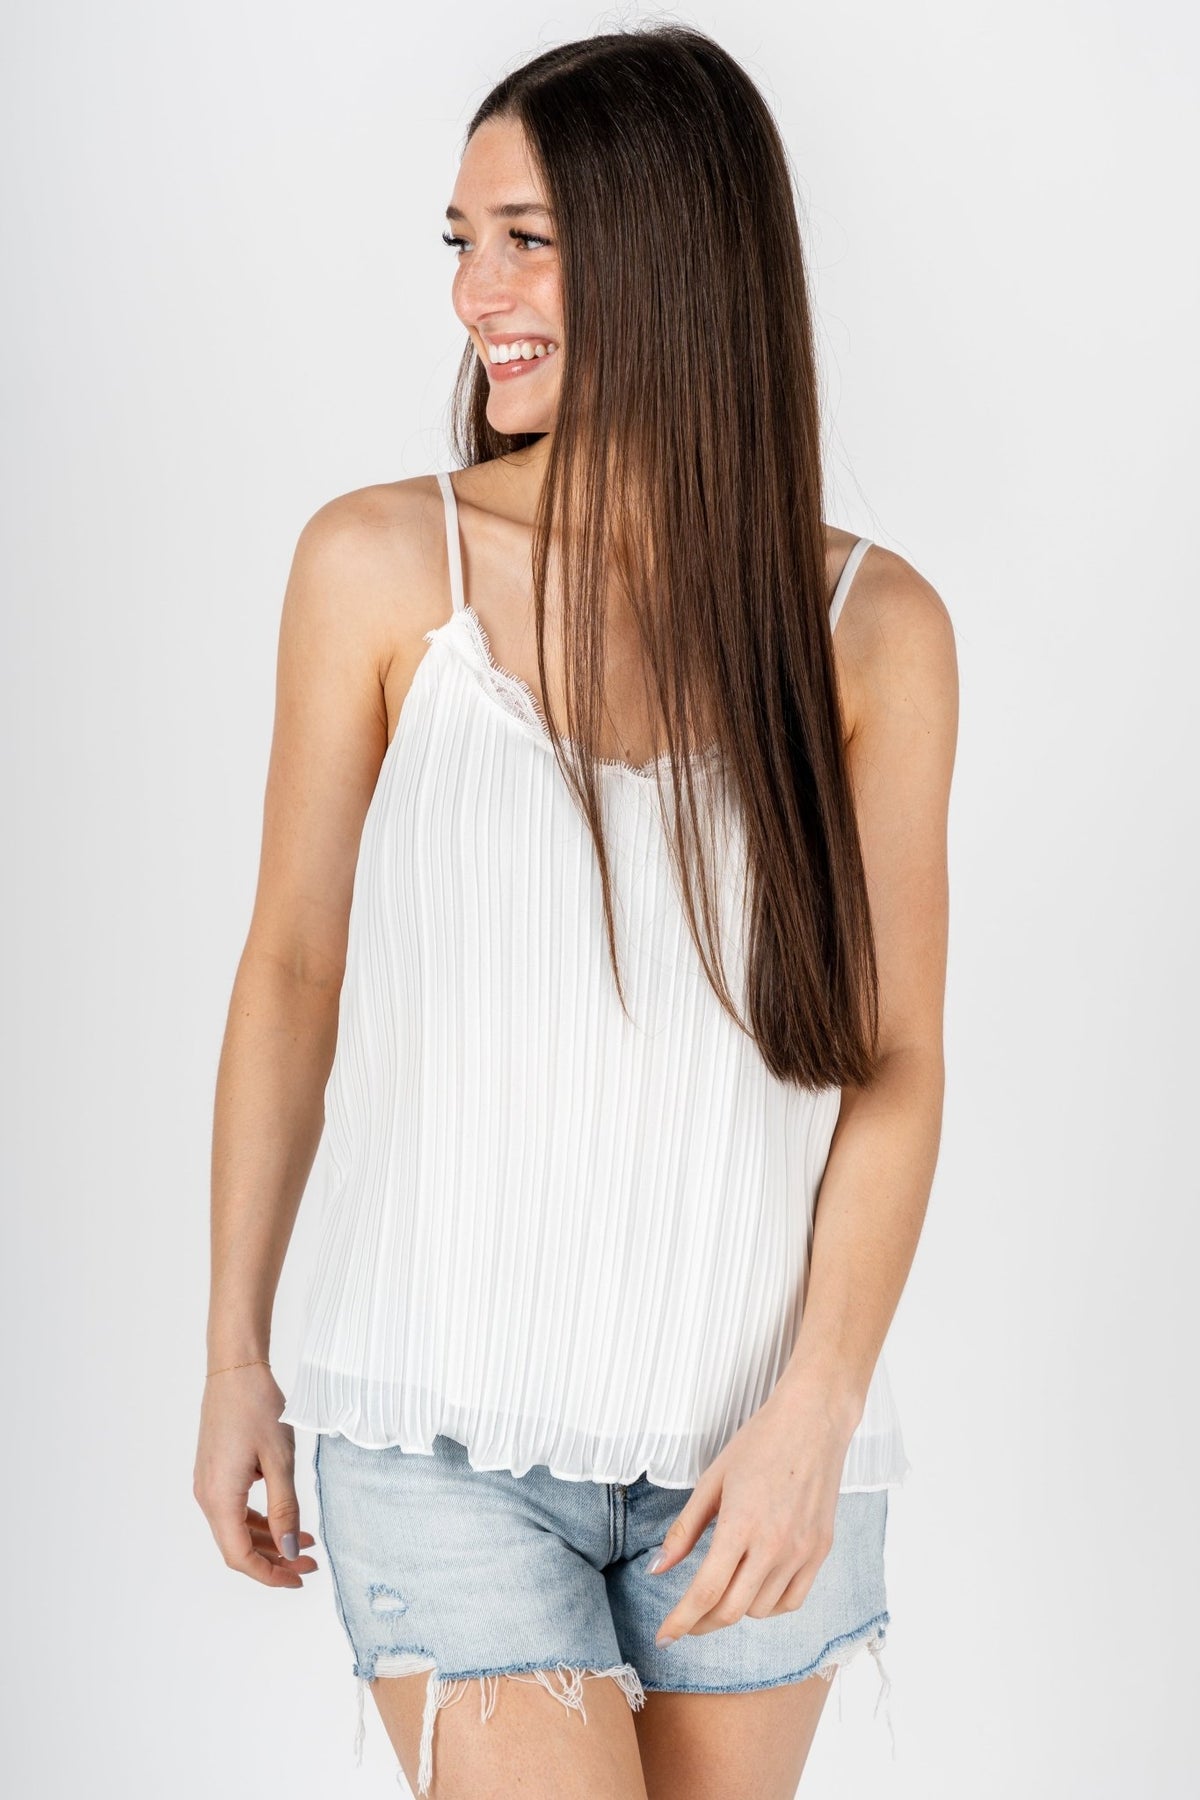 Pleated lace cami tank top off white - Trendy sweater - Cute American Summer Collection at Lush Fashion Lounge Boutique in Oklahoma City